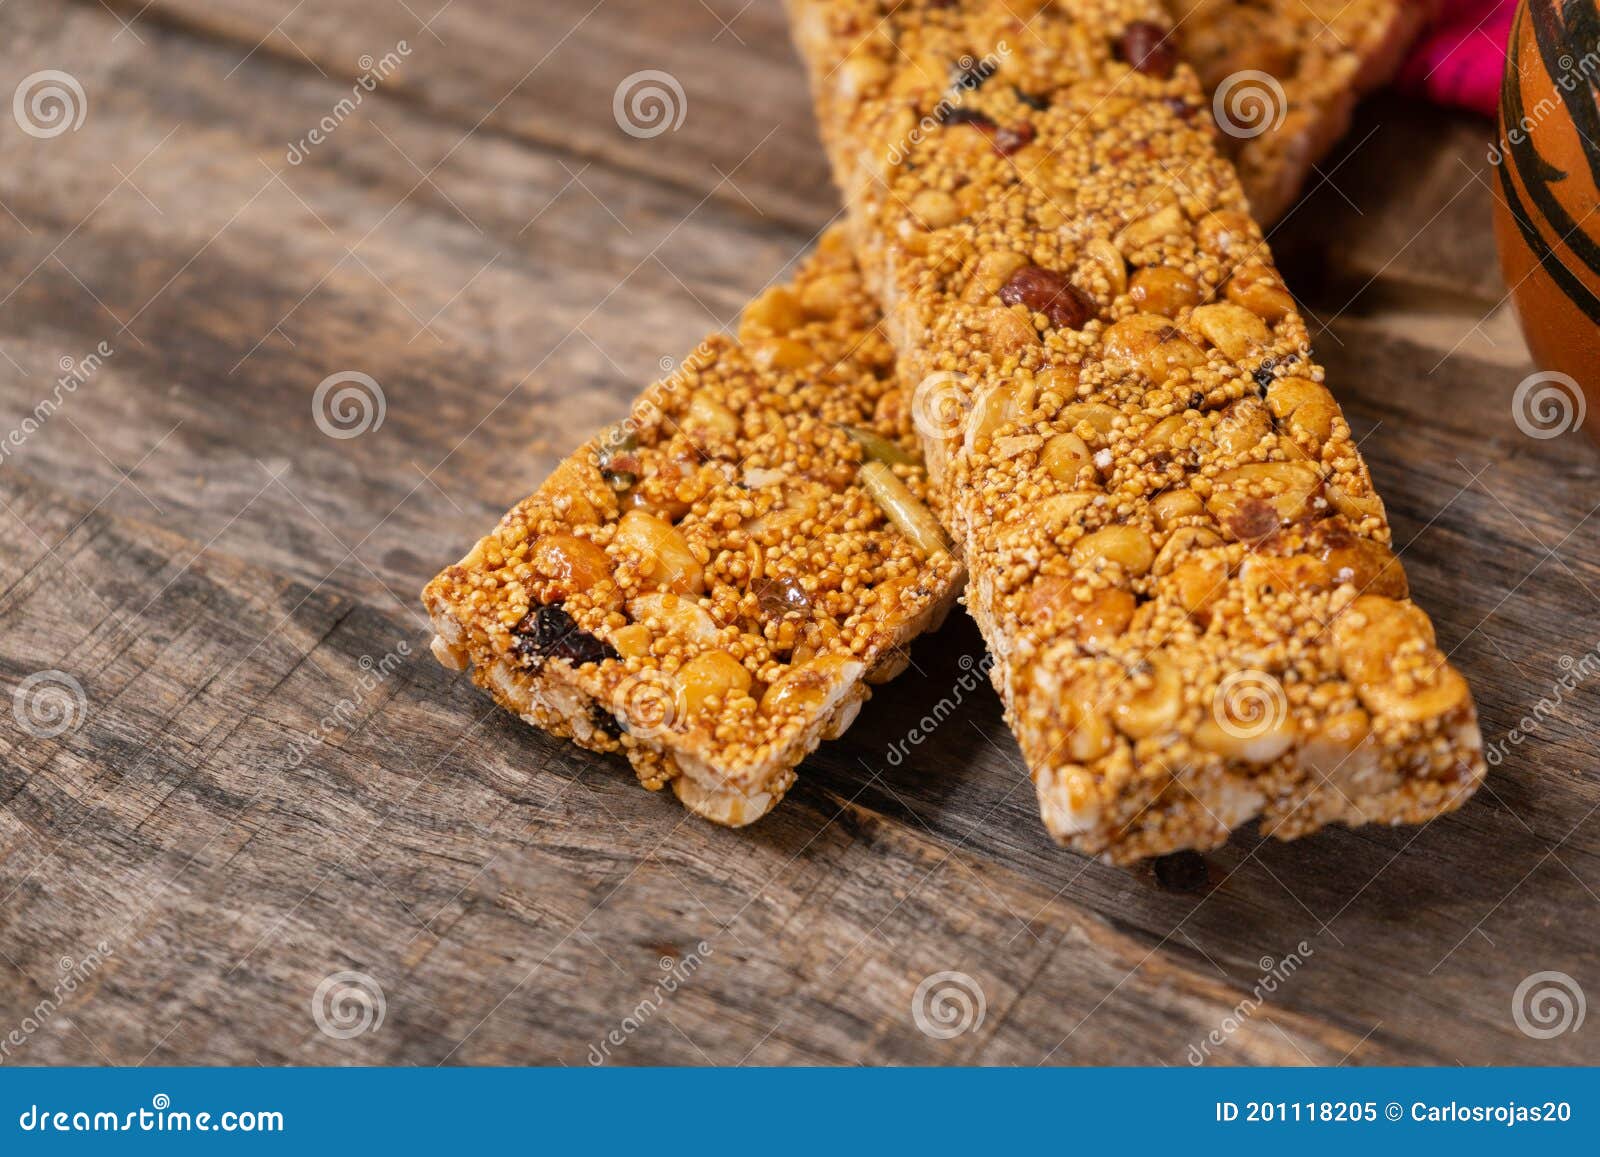 mexican amaranth bar with peanuts and honey also called alegria